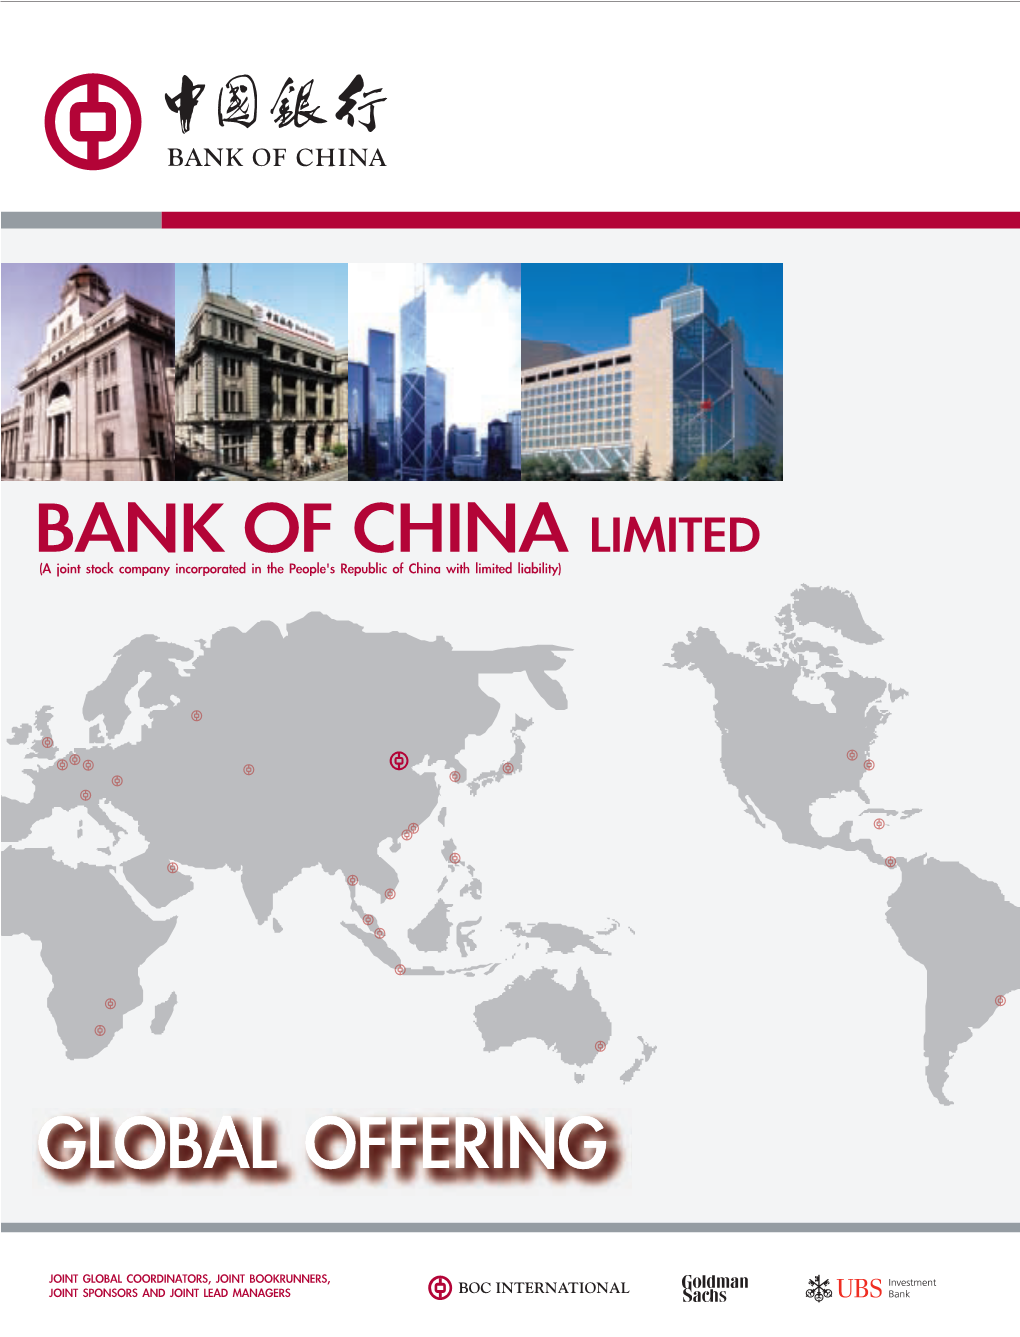 BANK of CHINA LIMITED A1A(1) (A Joint Stock Company Incorporated in the People's Republic of China with Limited Liability) GLOBAL OFFERING